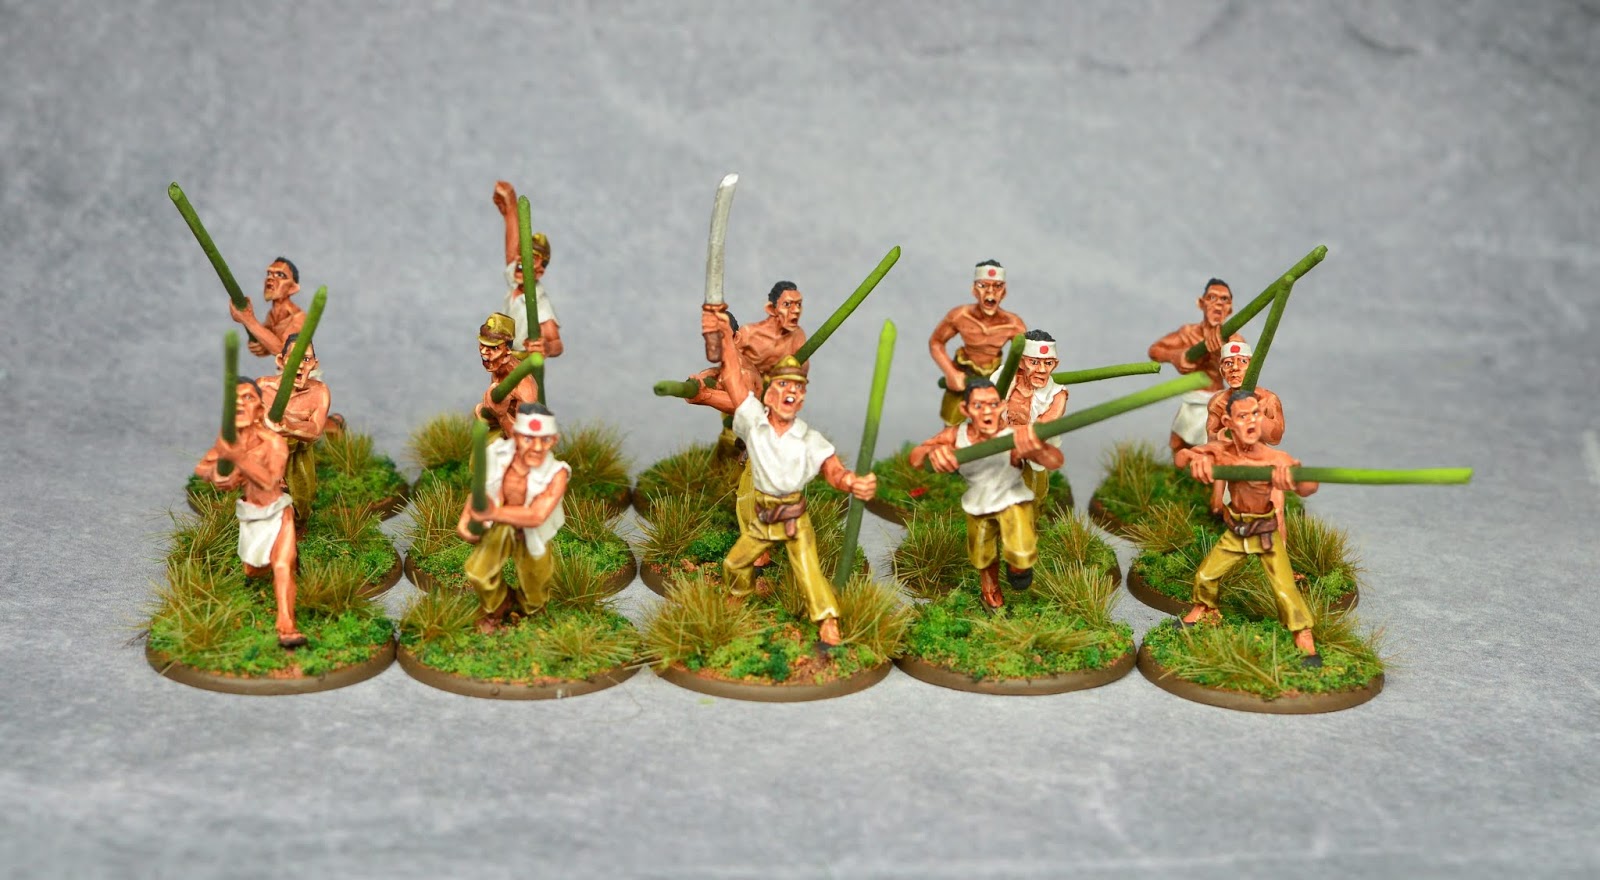 Vae Victis Miniature Painting Japanese Bamboo Spear Fighter Squad Saipan 1944 Warlord Games 28mm